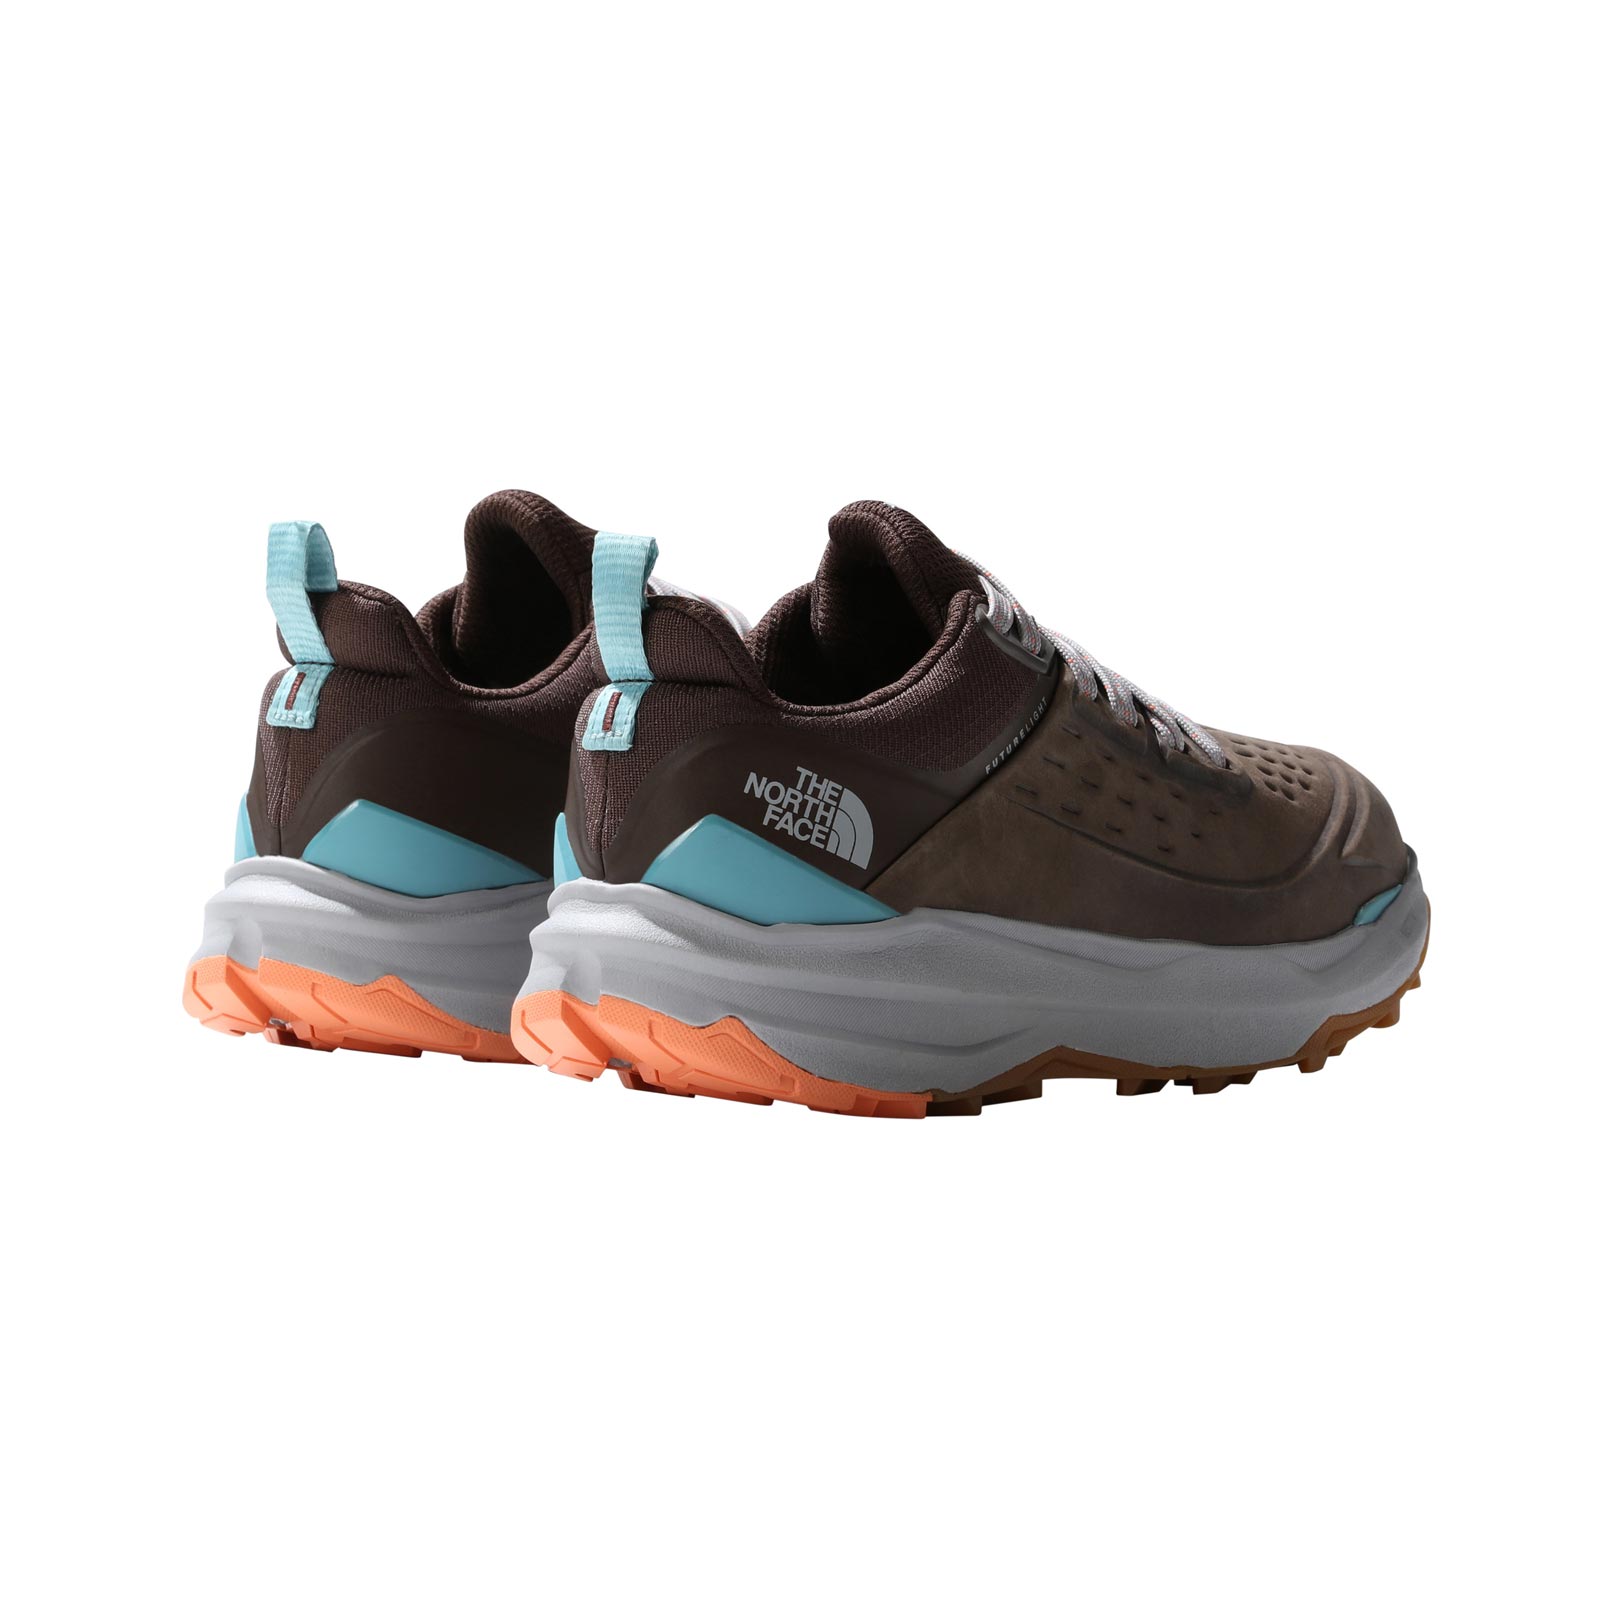 THE NORTH FACE VECTIV EXPLORIS 2 LEATHER WOMENS HIKING SHOES